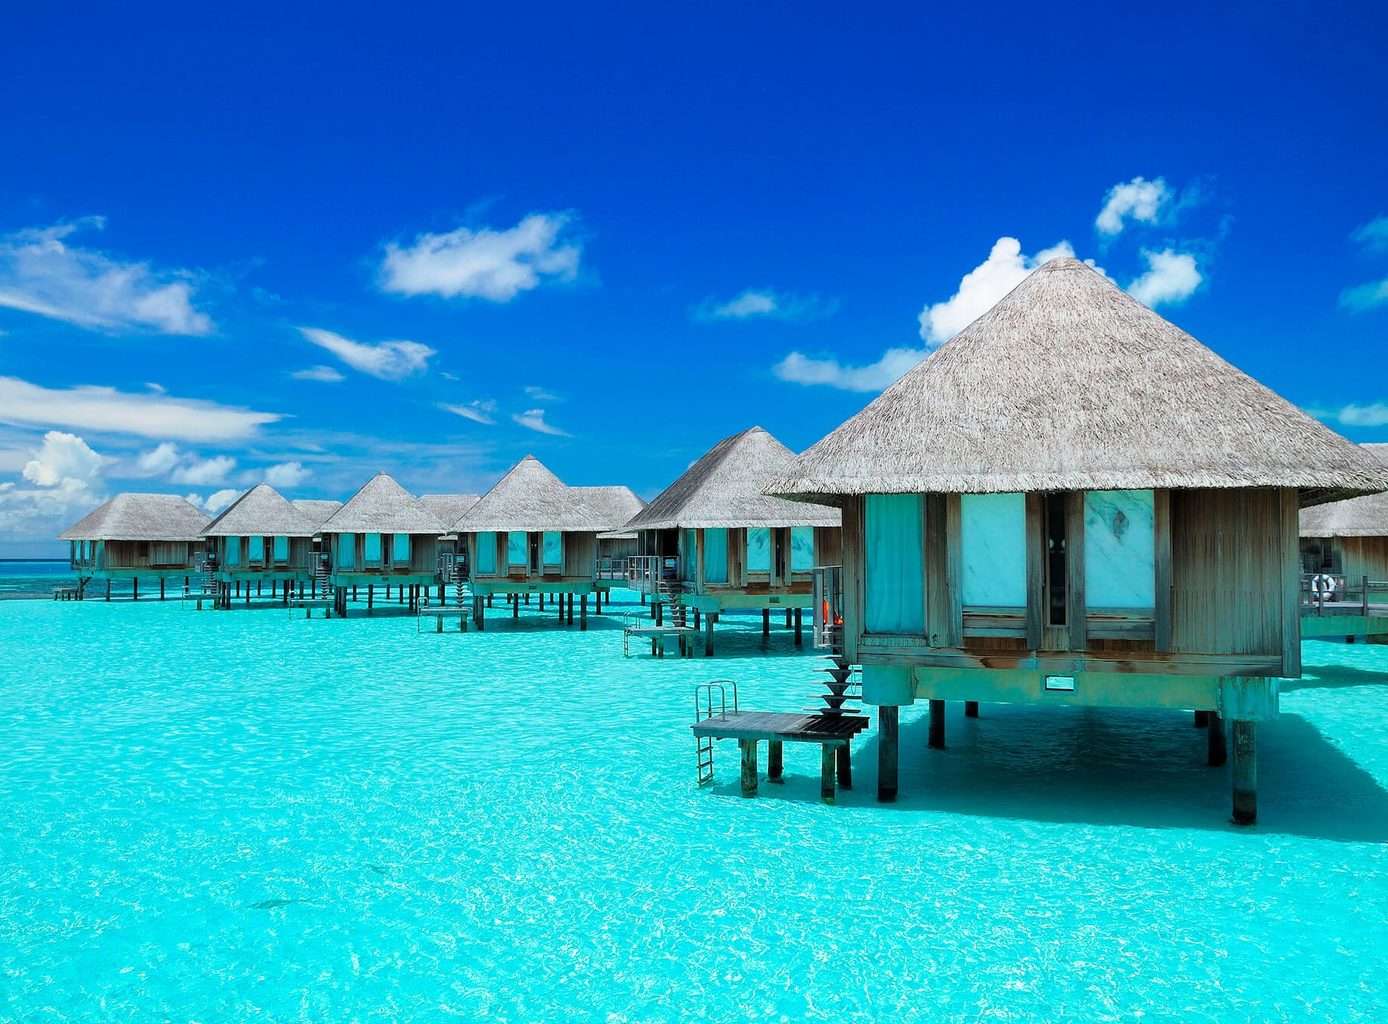 Asia Luxury Holidays and Indiann Ocean Calm, Overwater bungalow blue sea and sky view